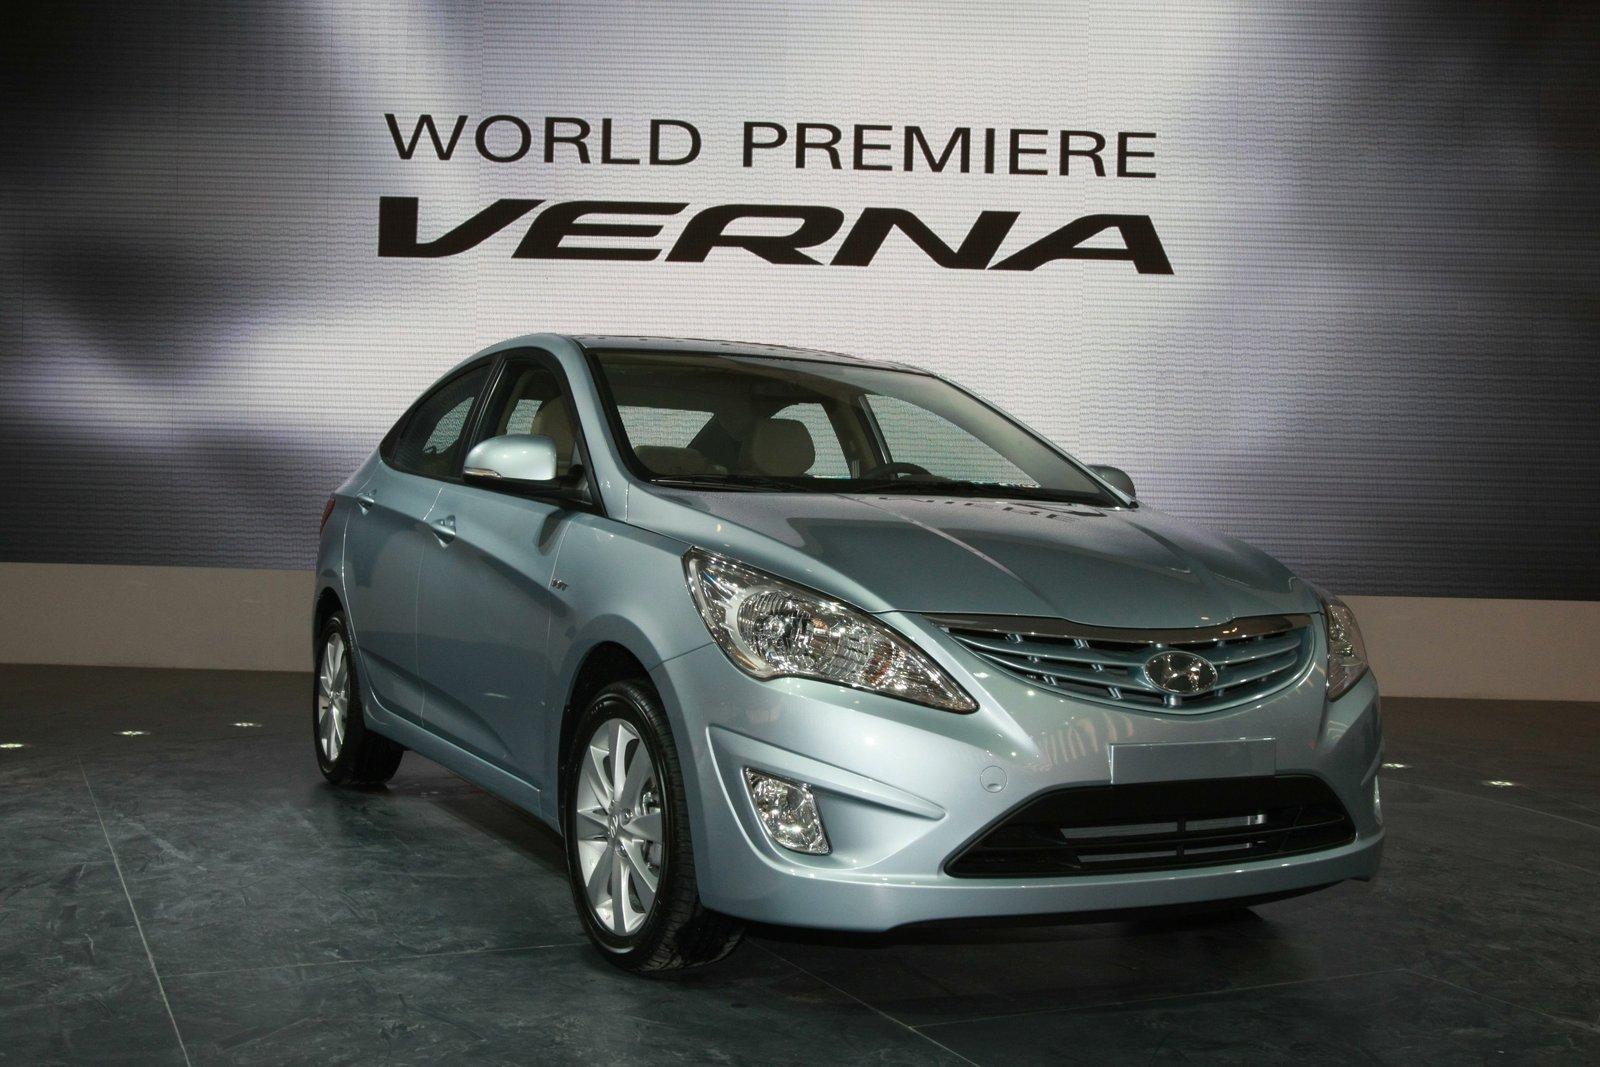 Car Wallpaper Gallery: 2011 Hyundai Verna (Accent) Picture